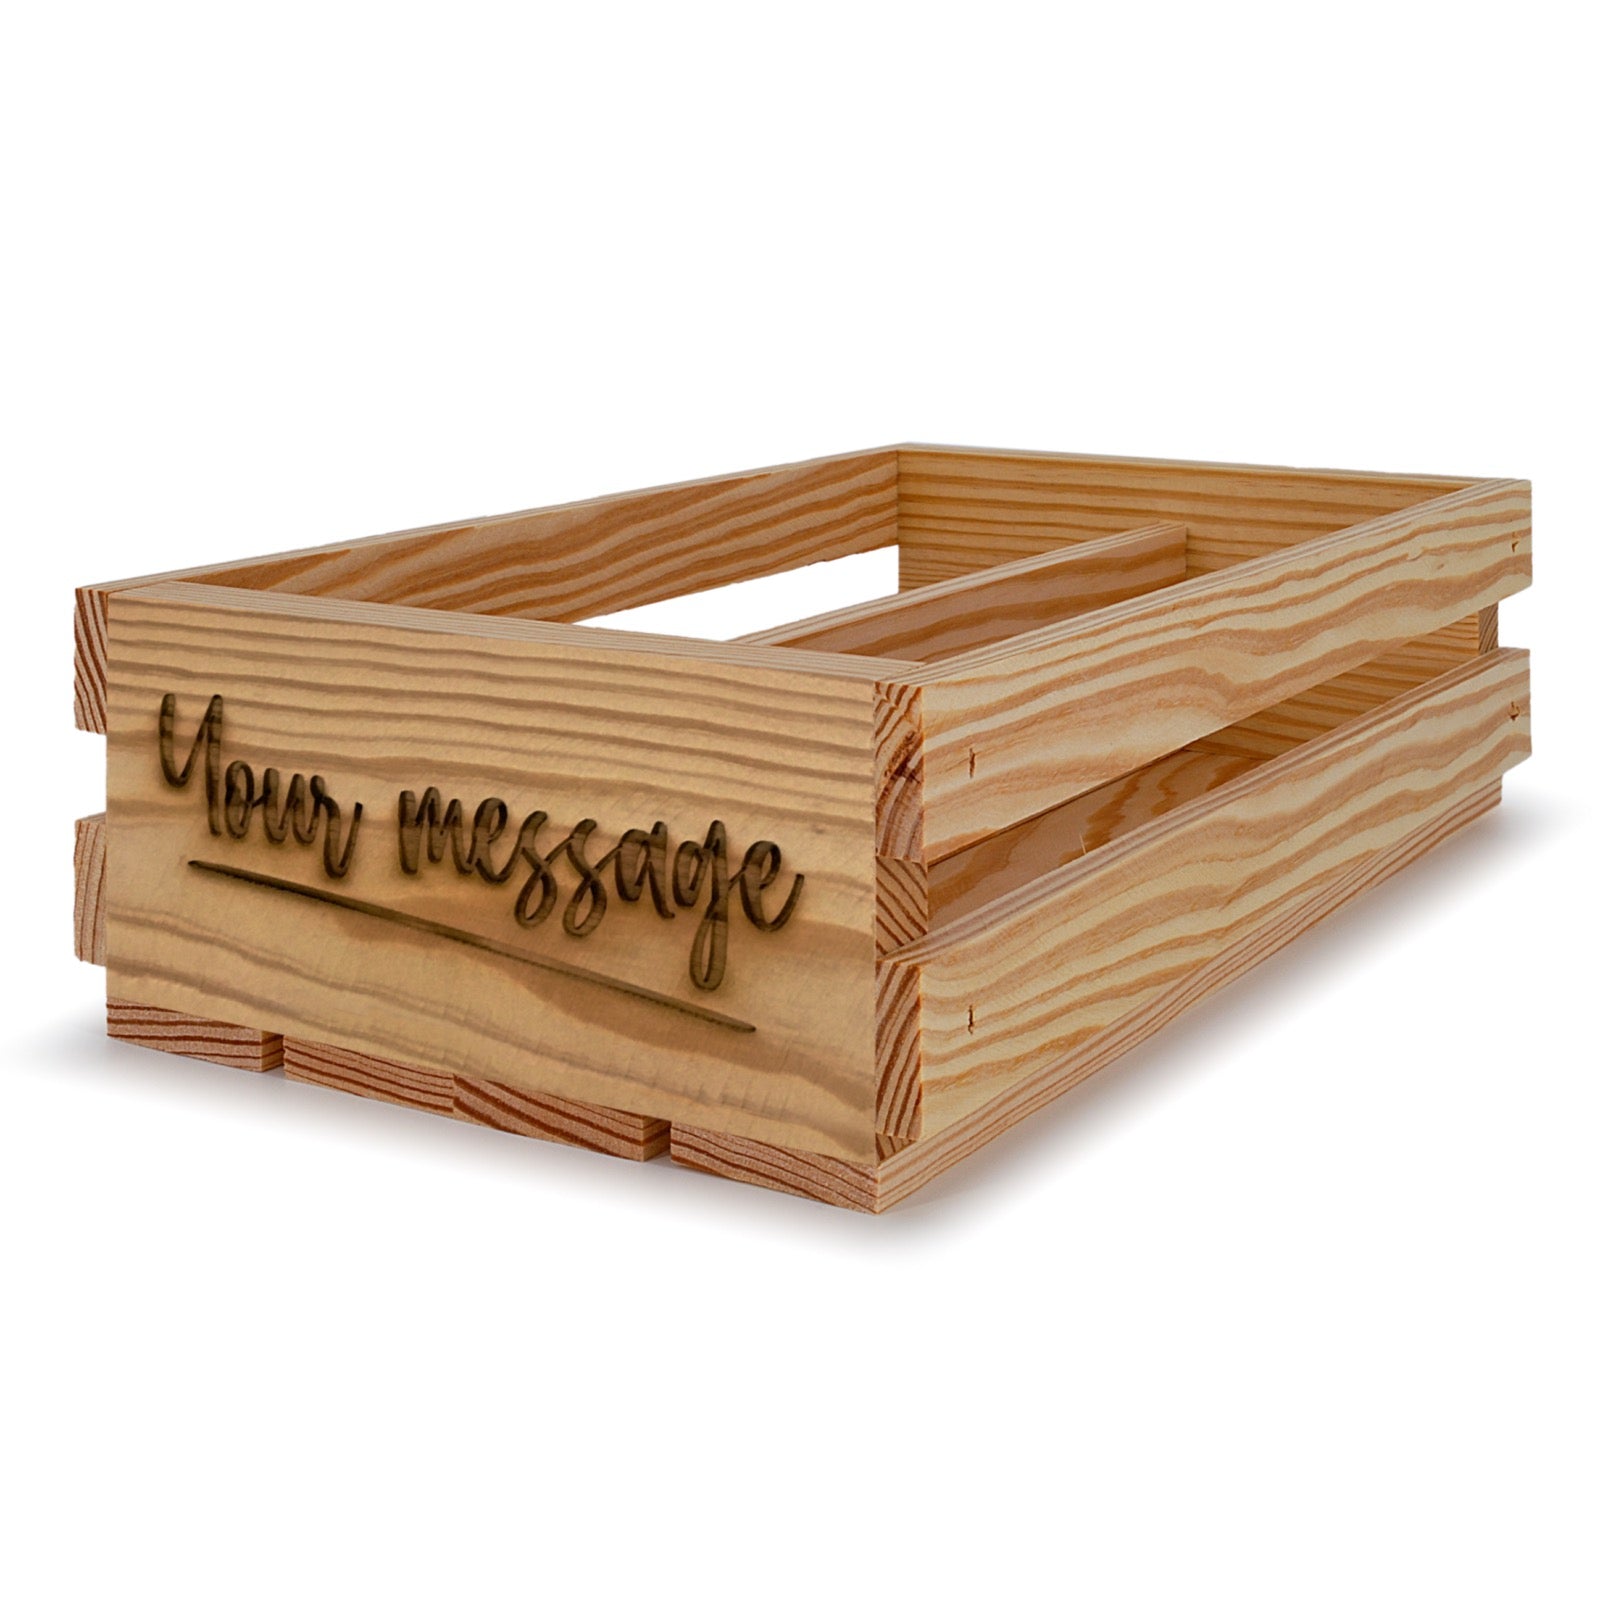 2 bottle wine crates 13x7.5x3.5 your message included